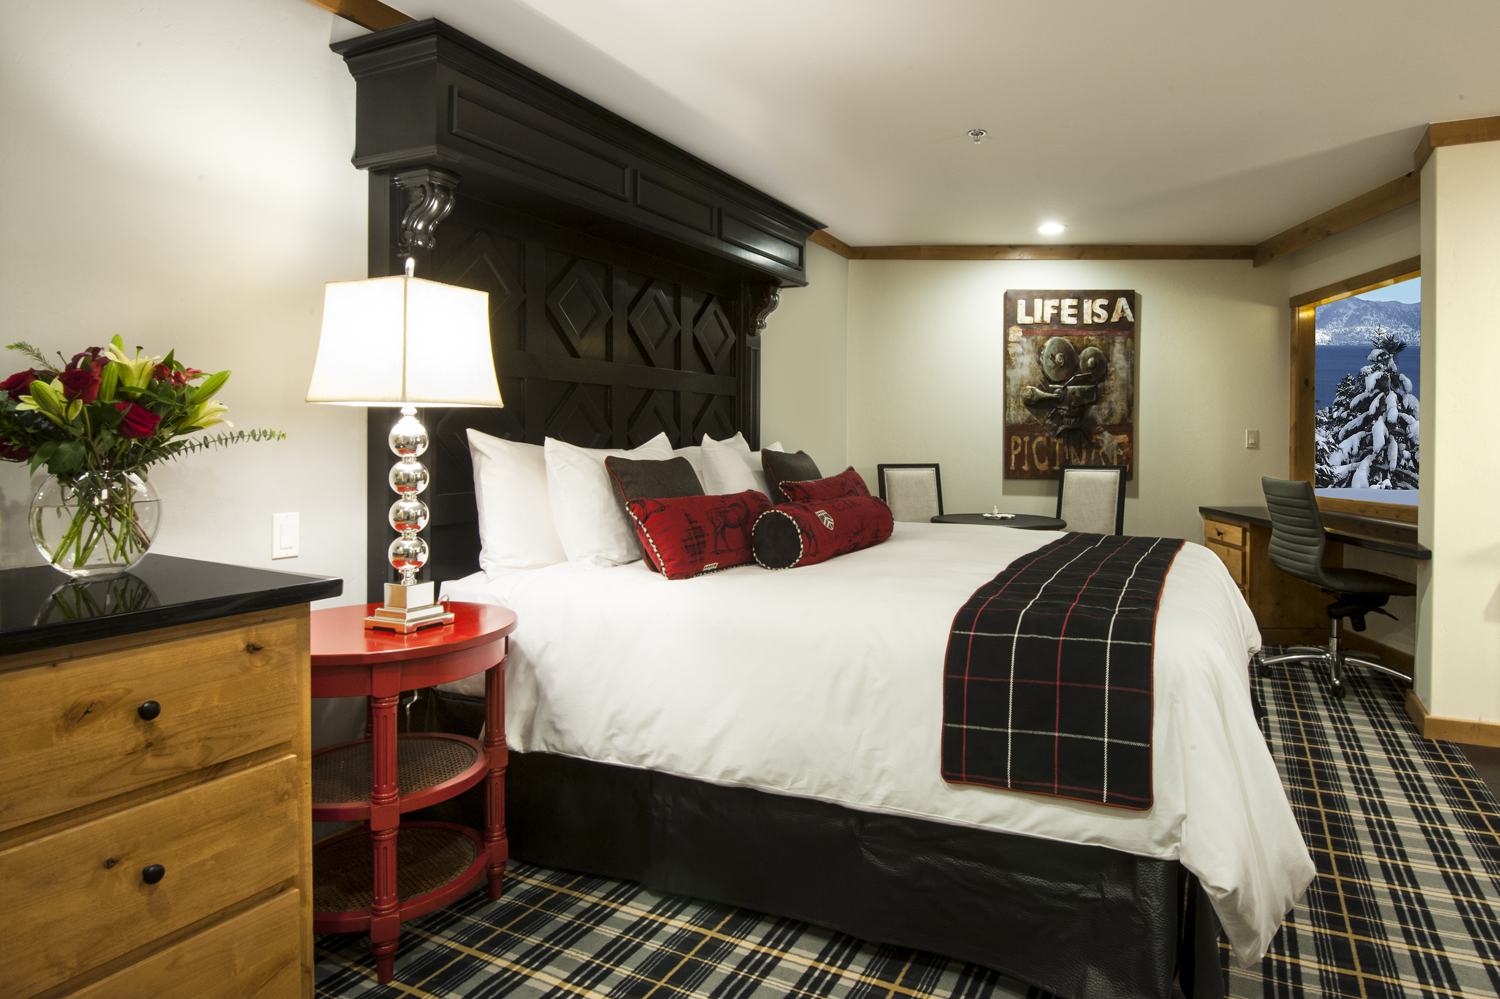 The Landing Resort & Spa guest rooms offer private decks with Lake Tahoe views.